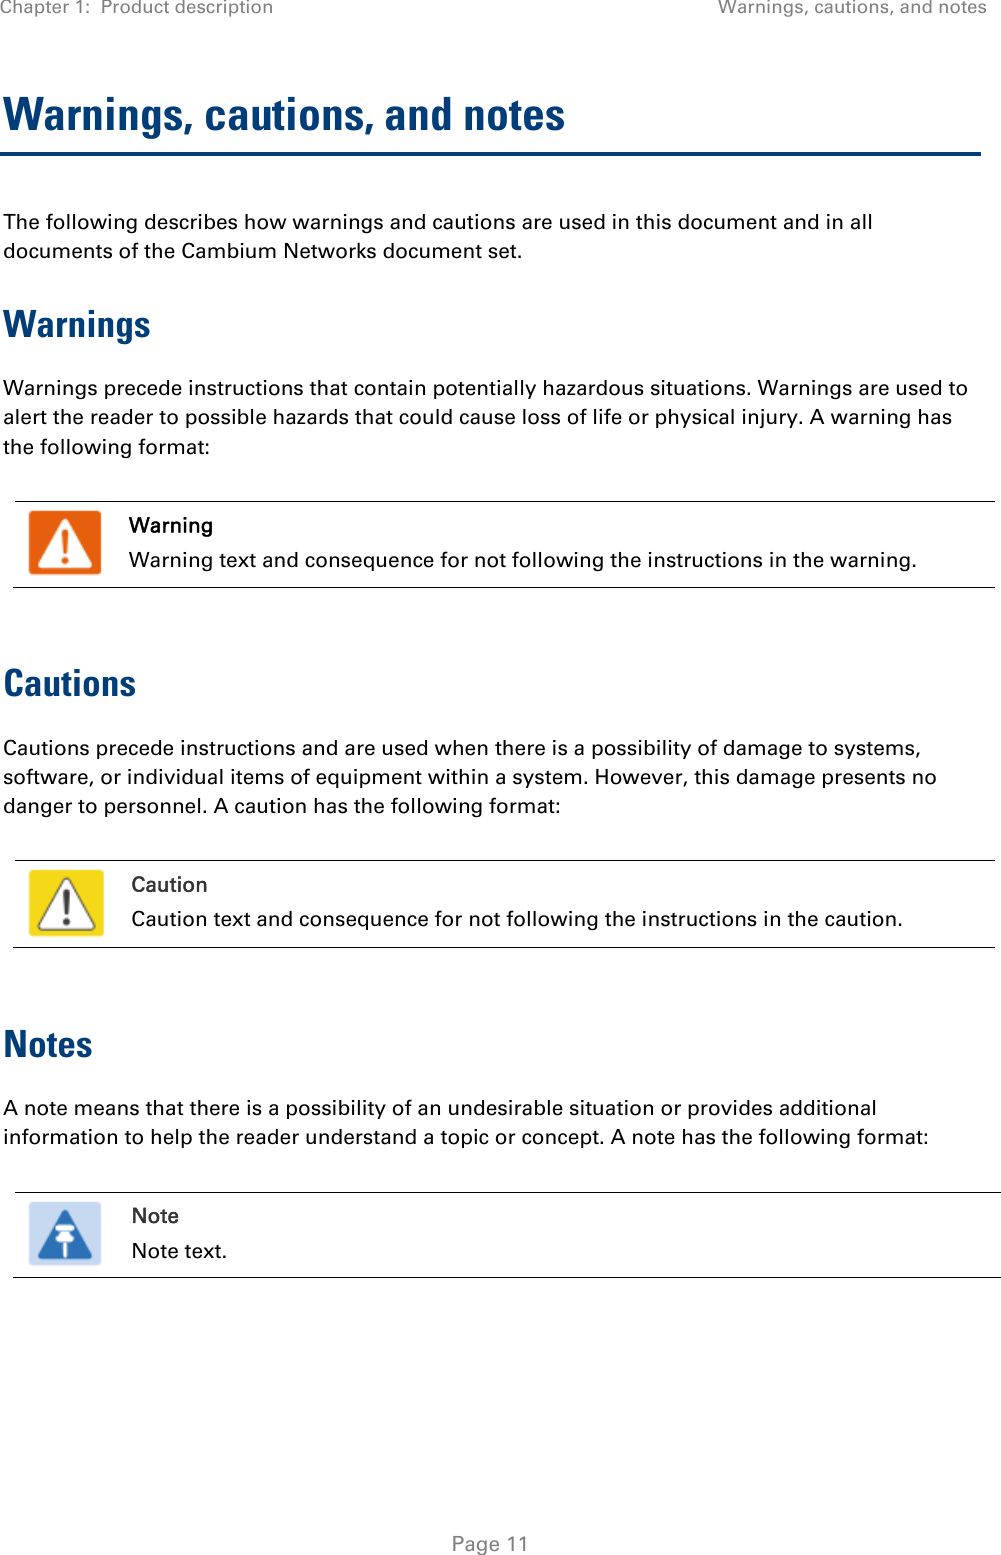 Chapter 1:  Product description  Warnings, cautions, and notes   Page 11 Warnings, cautions, and notes The following describes how warnings and cautions are used in this document and in all documents of the Cambium Networks document set. Warnings Warnings precede instructions that contain potentially hazardous situations. Warnings are used to alert the reader to possible hazards that could cause loss of life or physical injury. A warning has the following format:   Warning Warning text and consequence for not following the instructions in the warning.  Cautions Cautions precede instructions and are used when there is a possibility of damage to systems, software, or individual items of equipment within a system. However, this damage presents no danger to personnel. A caution has the following format:   Caution Caution text and consequence for not following the instructions in the caution.  Notes A note means that there is a possibility of an undesirable situation or provides additional information to help the reader understand a topic or concept. A note has the following format:   Note Note text.   